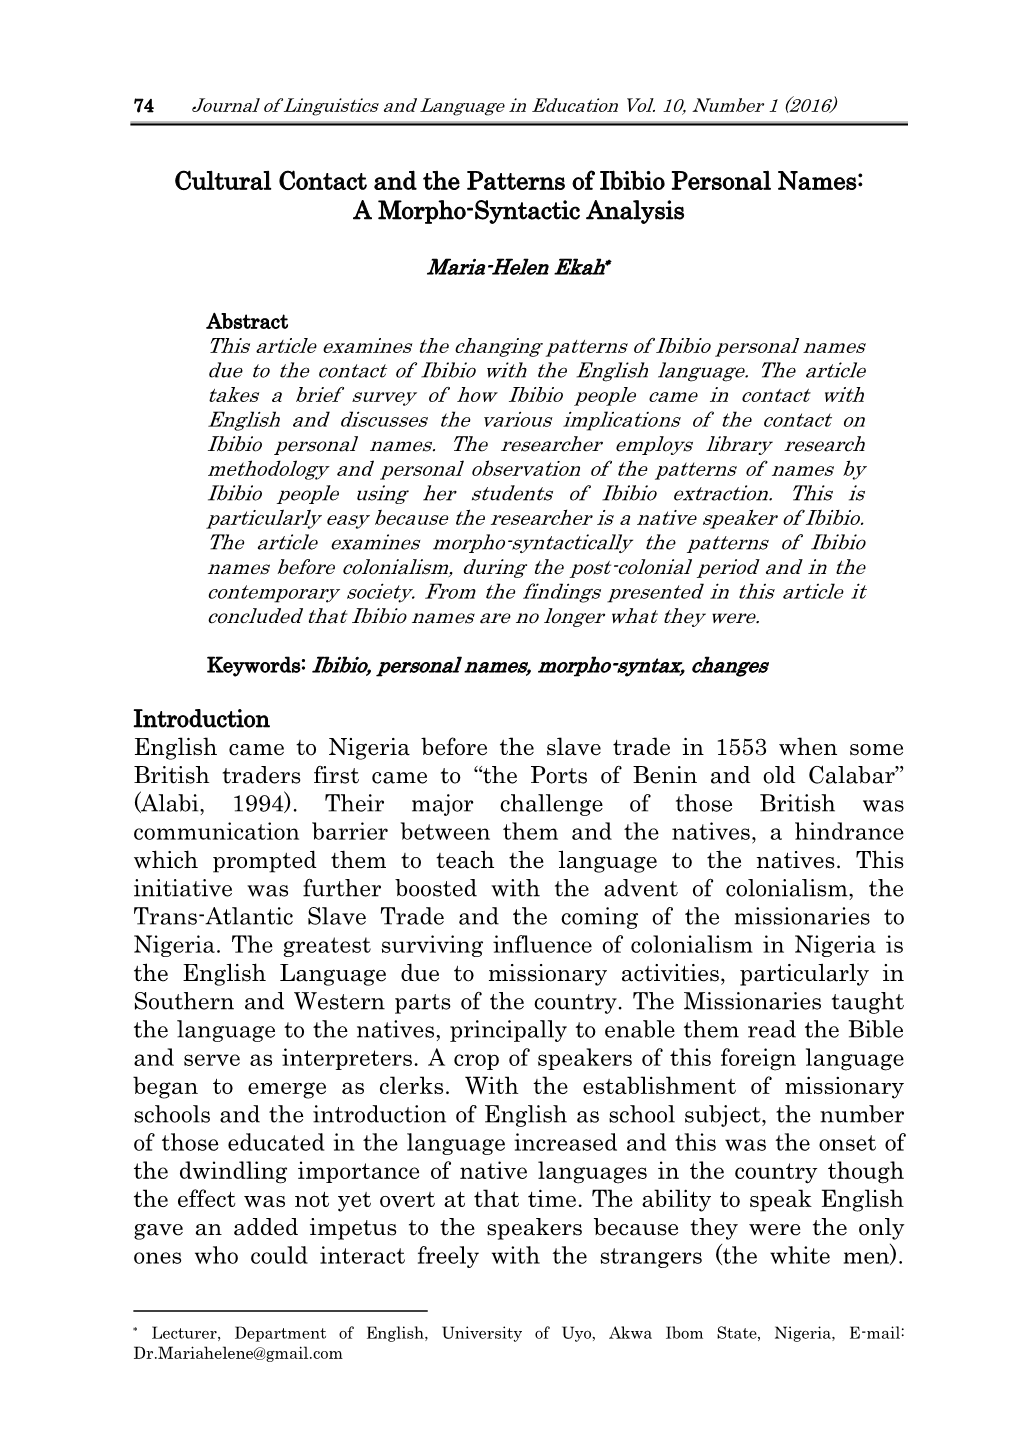 Cultural Contact and the Patterns of Ibibio Personal Names: a Morpho-Syntactic Analysis